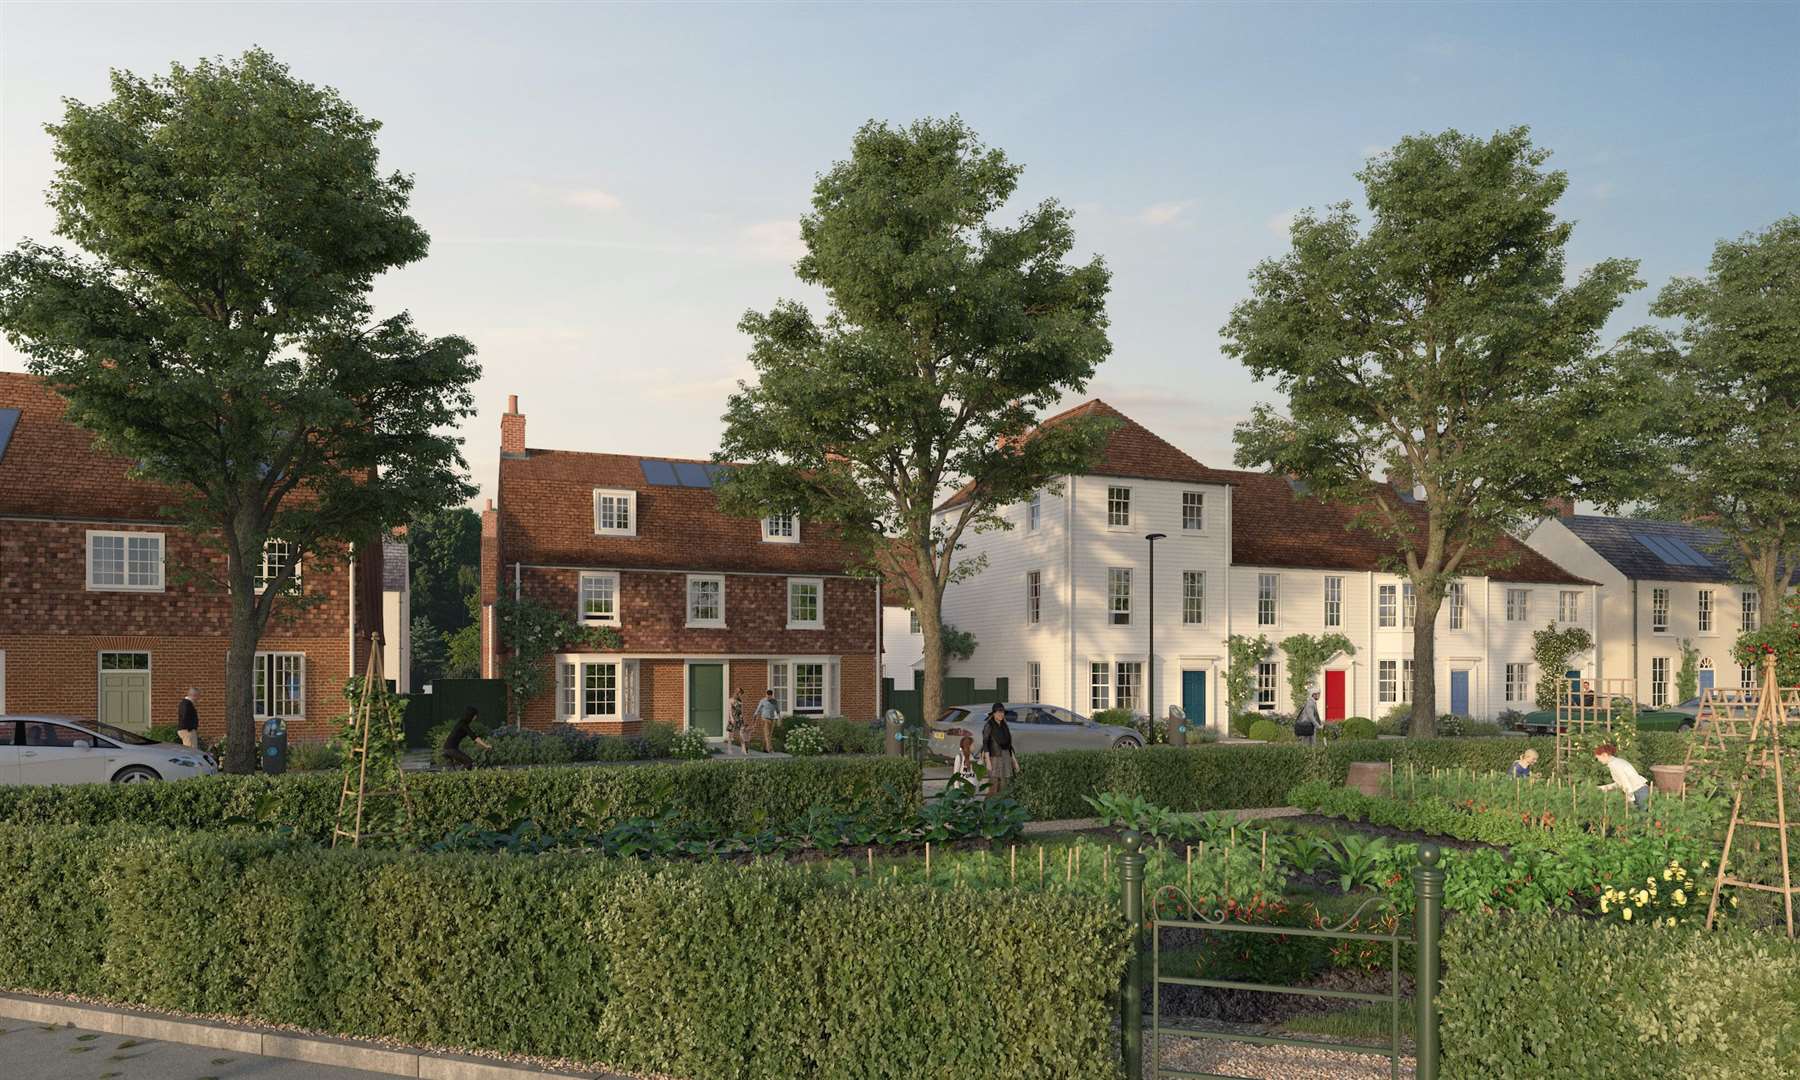 How the new Faversham scheme is poised to look. Picture: Duchy of Cornwall